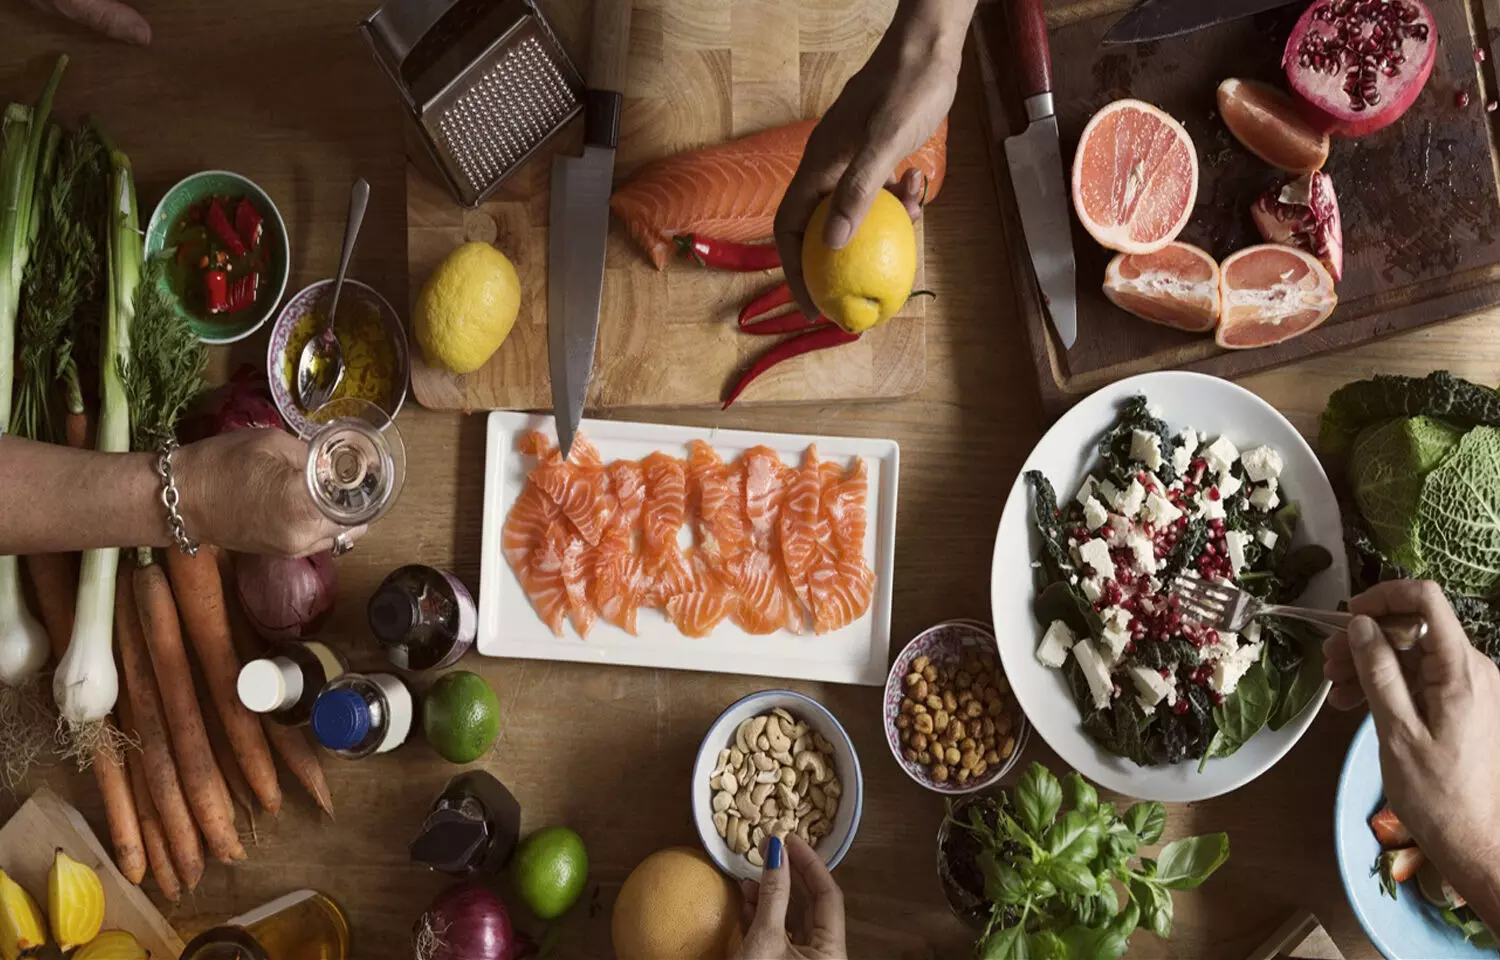 Nordic diet linked to prolonged survival free from dementia and disability: Study